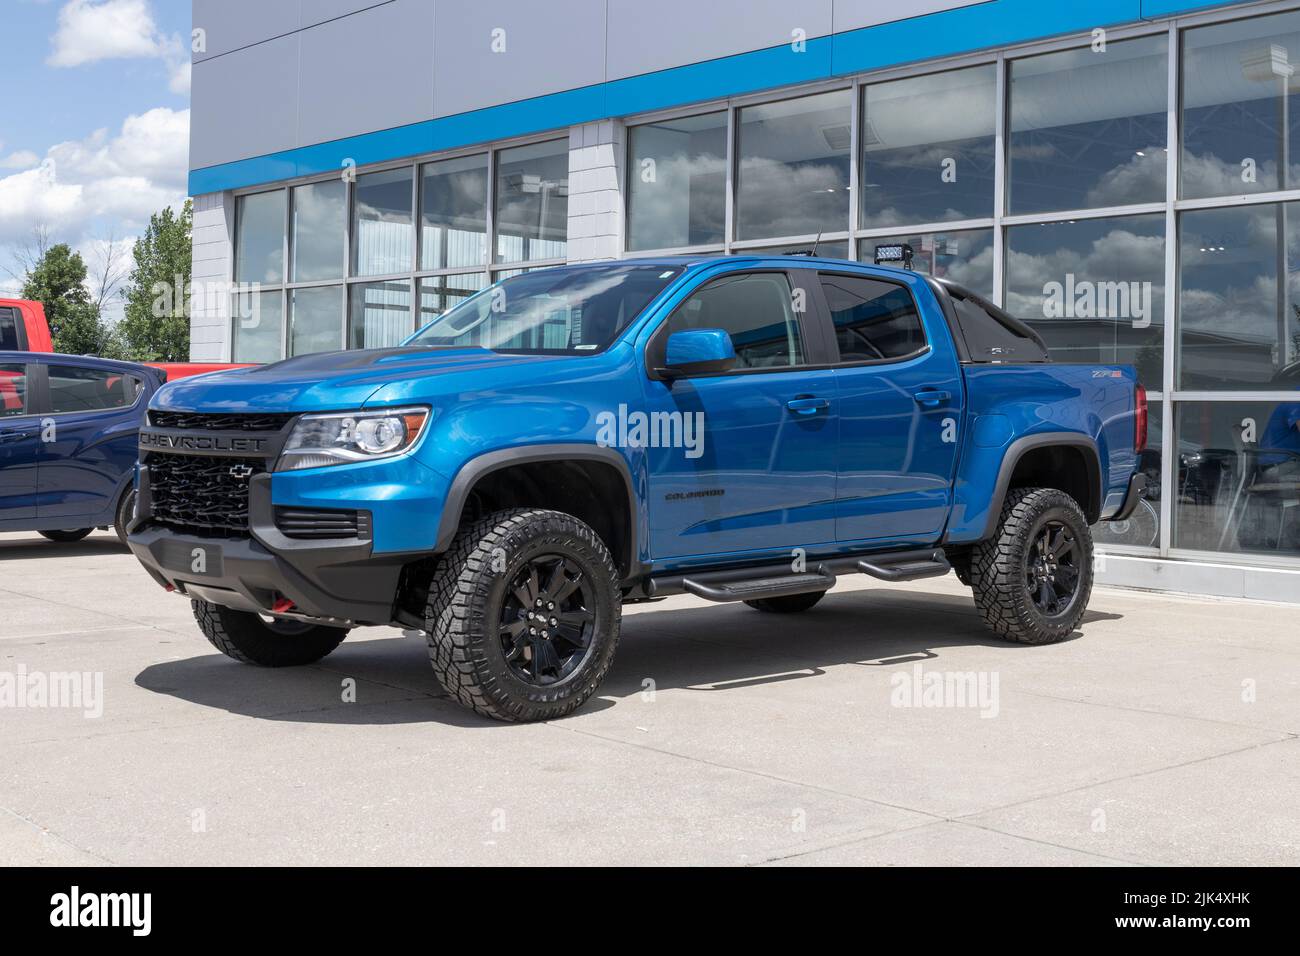 Plainfield - Circa July 2022: Chevrolet Colorado pickup display. Chevy offers the Colorado in the base LS, ZR2, Z71 and LT models. Stock Photo